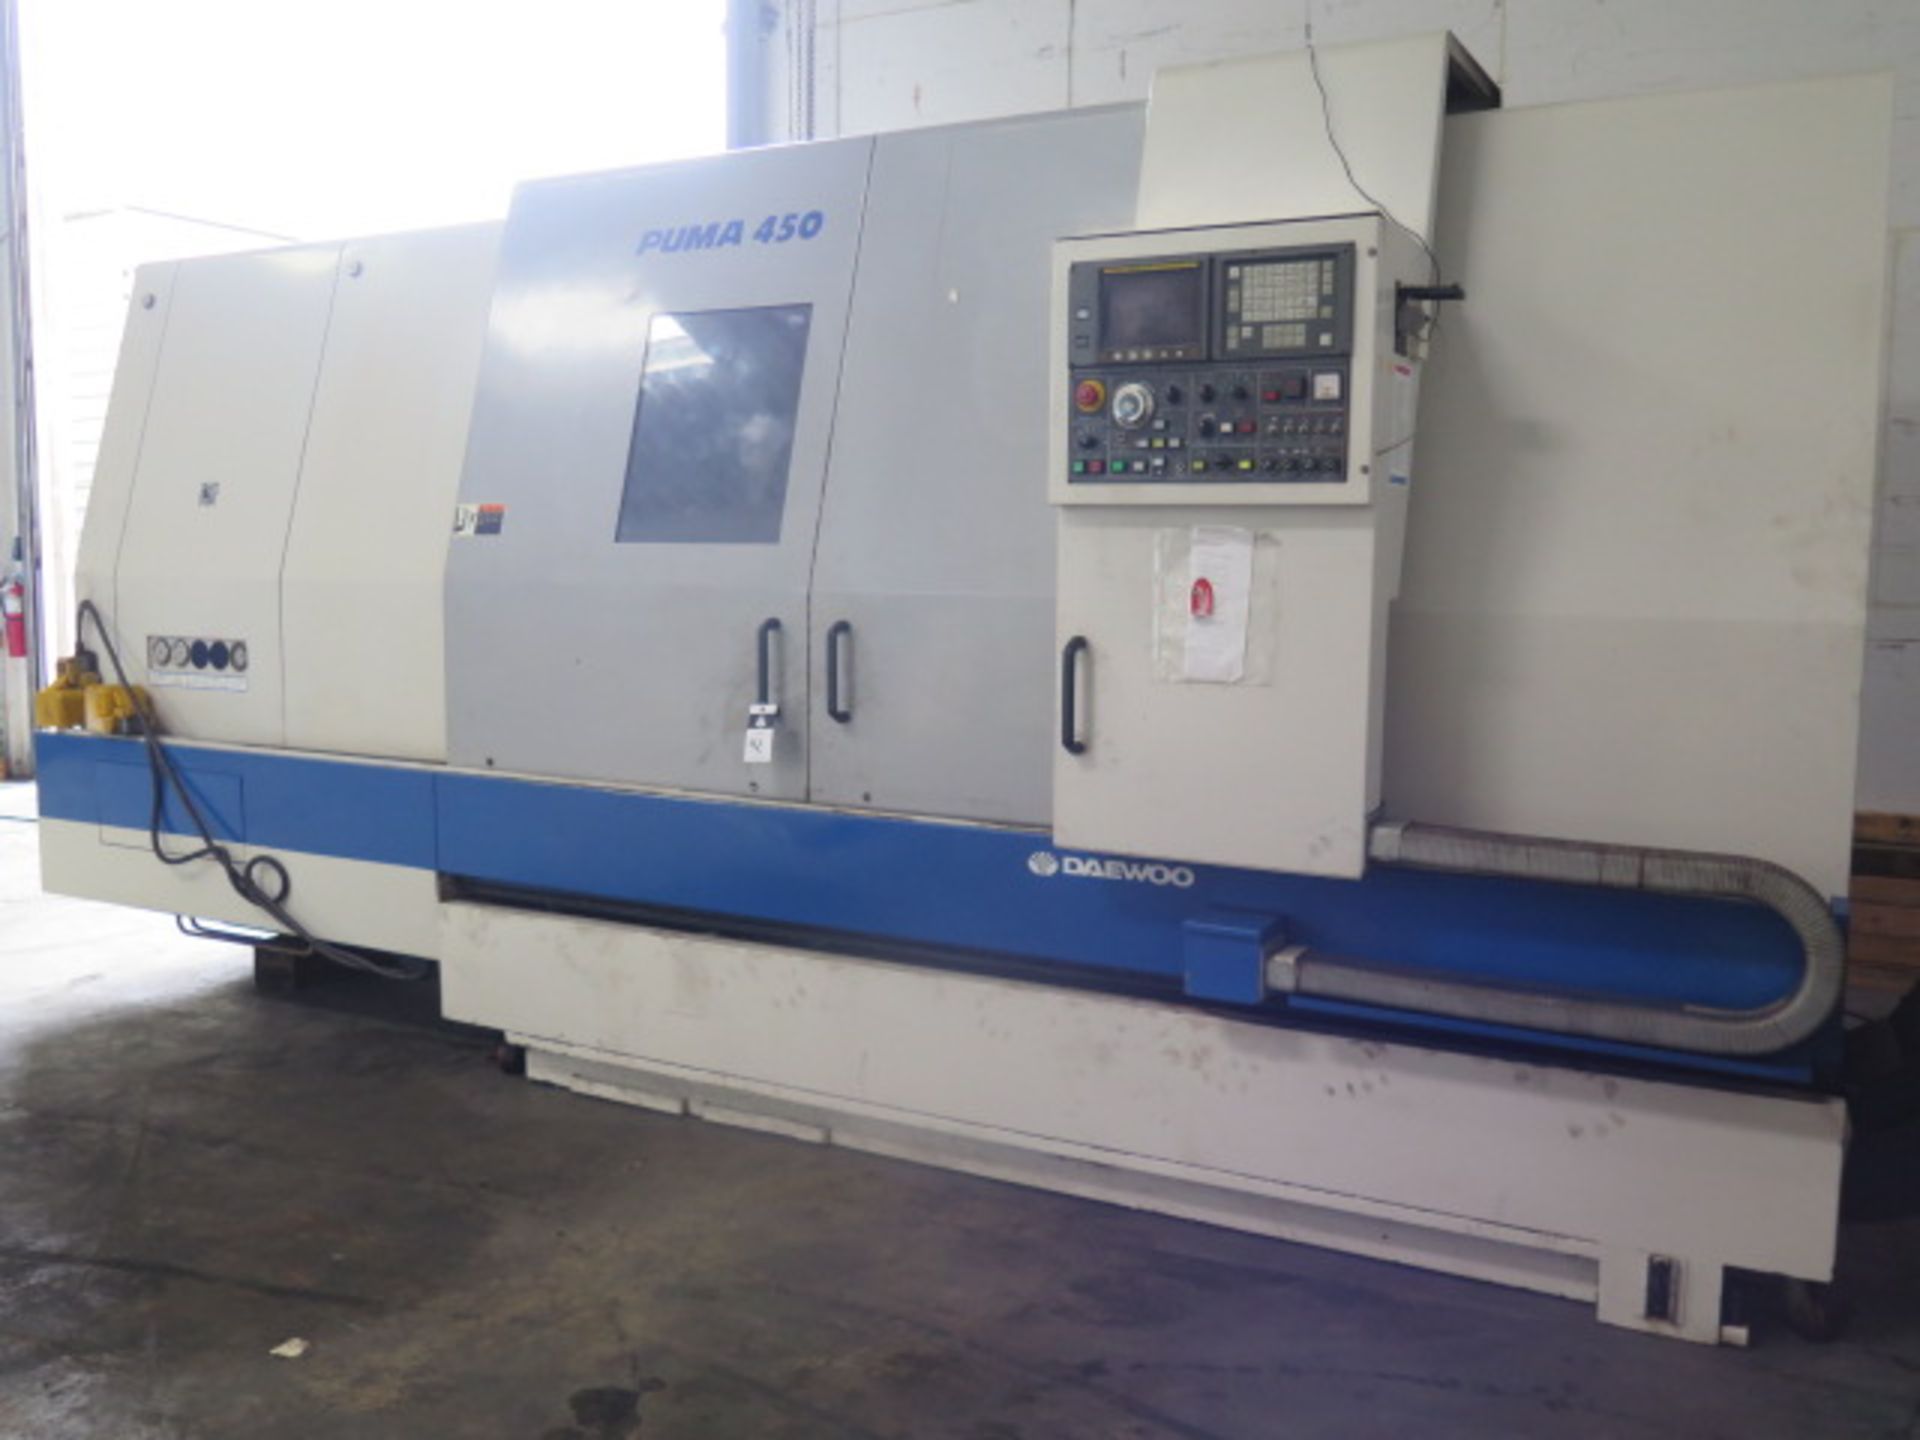 1998 Daewoo PUMA 450A CNC Turning Center s/n PM450114 w/ Fanuc 0-T Controls, 12-Station, SOLD AS IS - Image 2 of 15